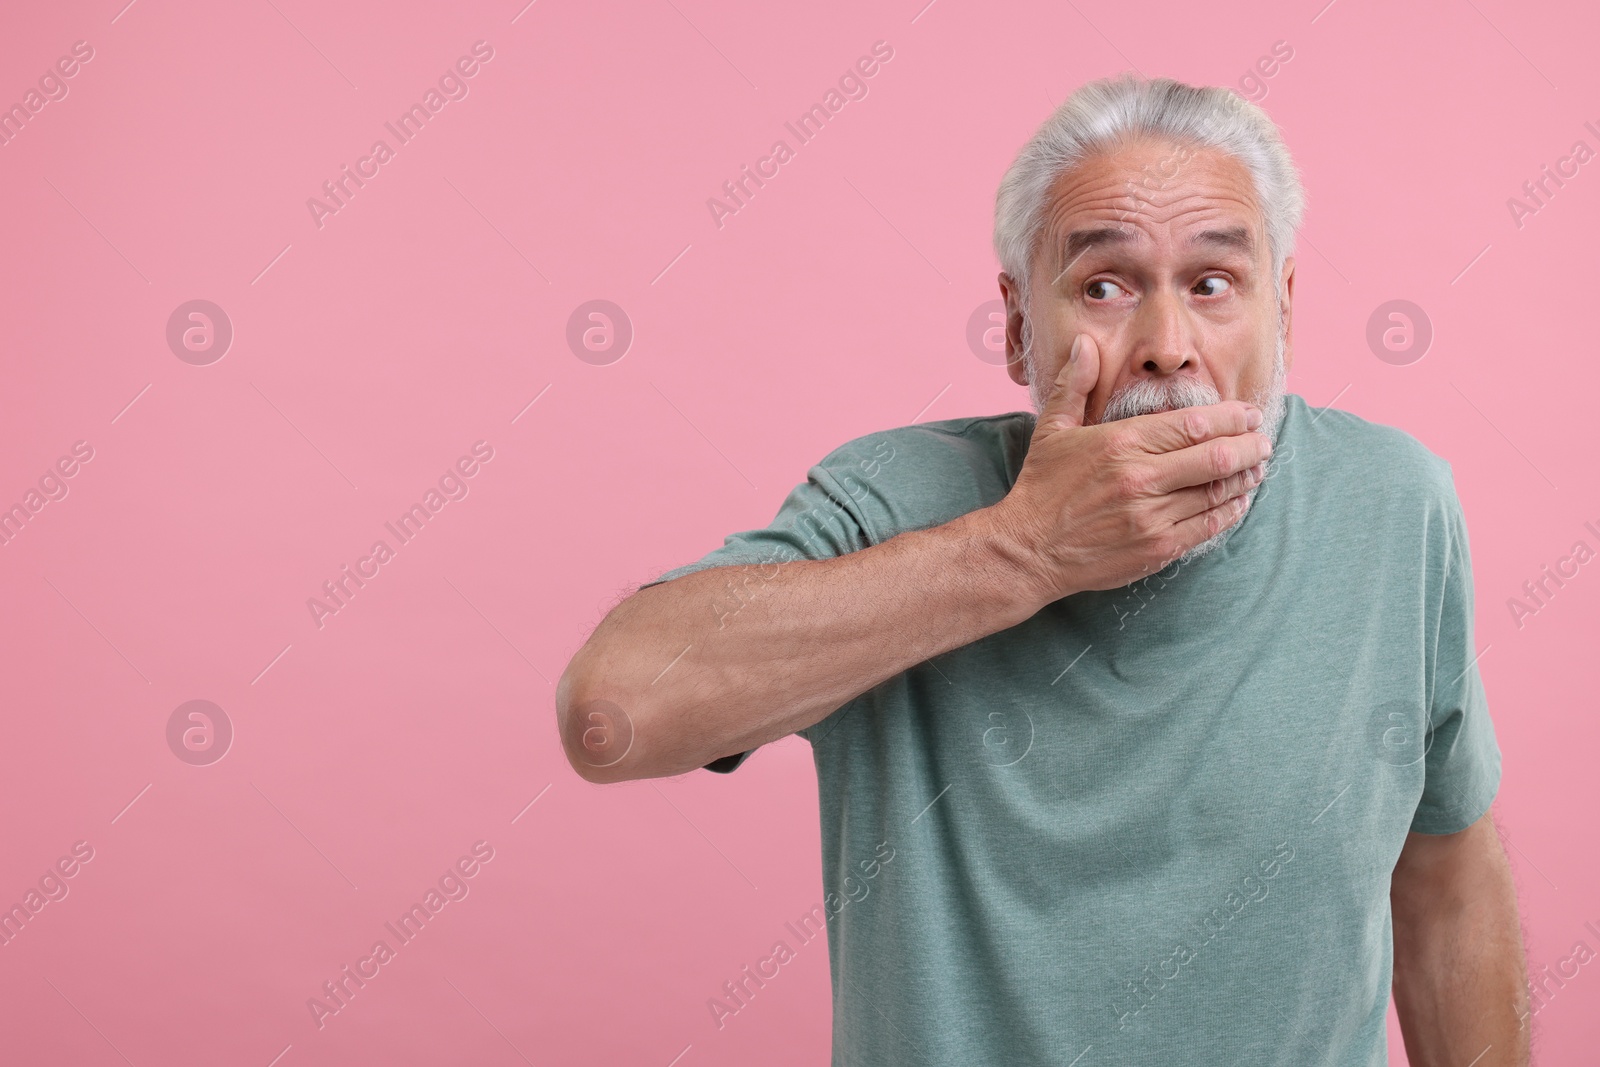 Photo of Embarrassed senior man covering mouth on pink background. Space for text